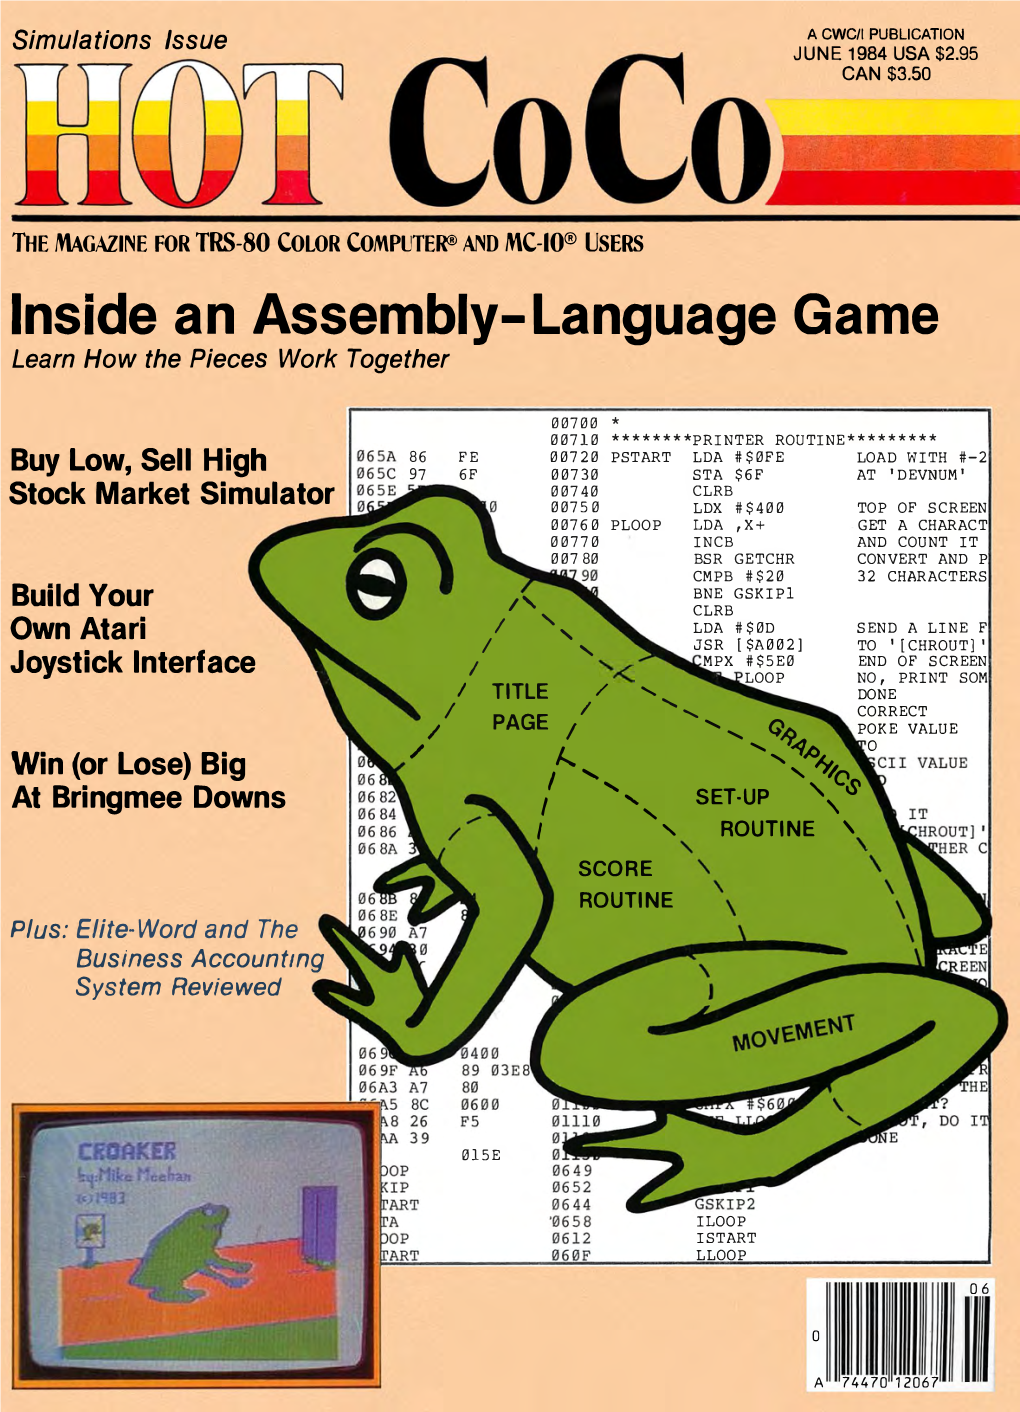 Inside an Assembly-Language Game